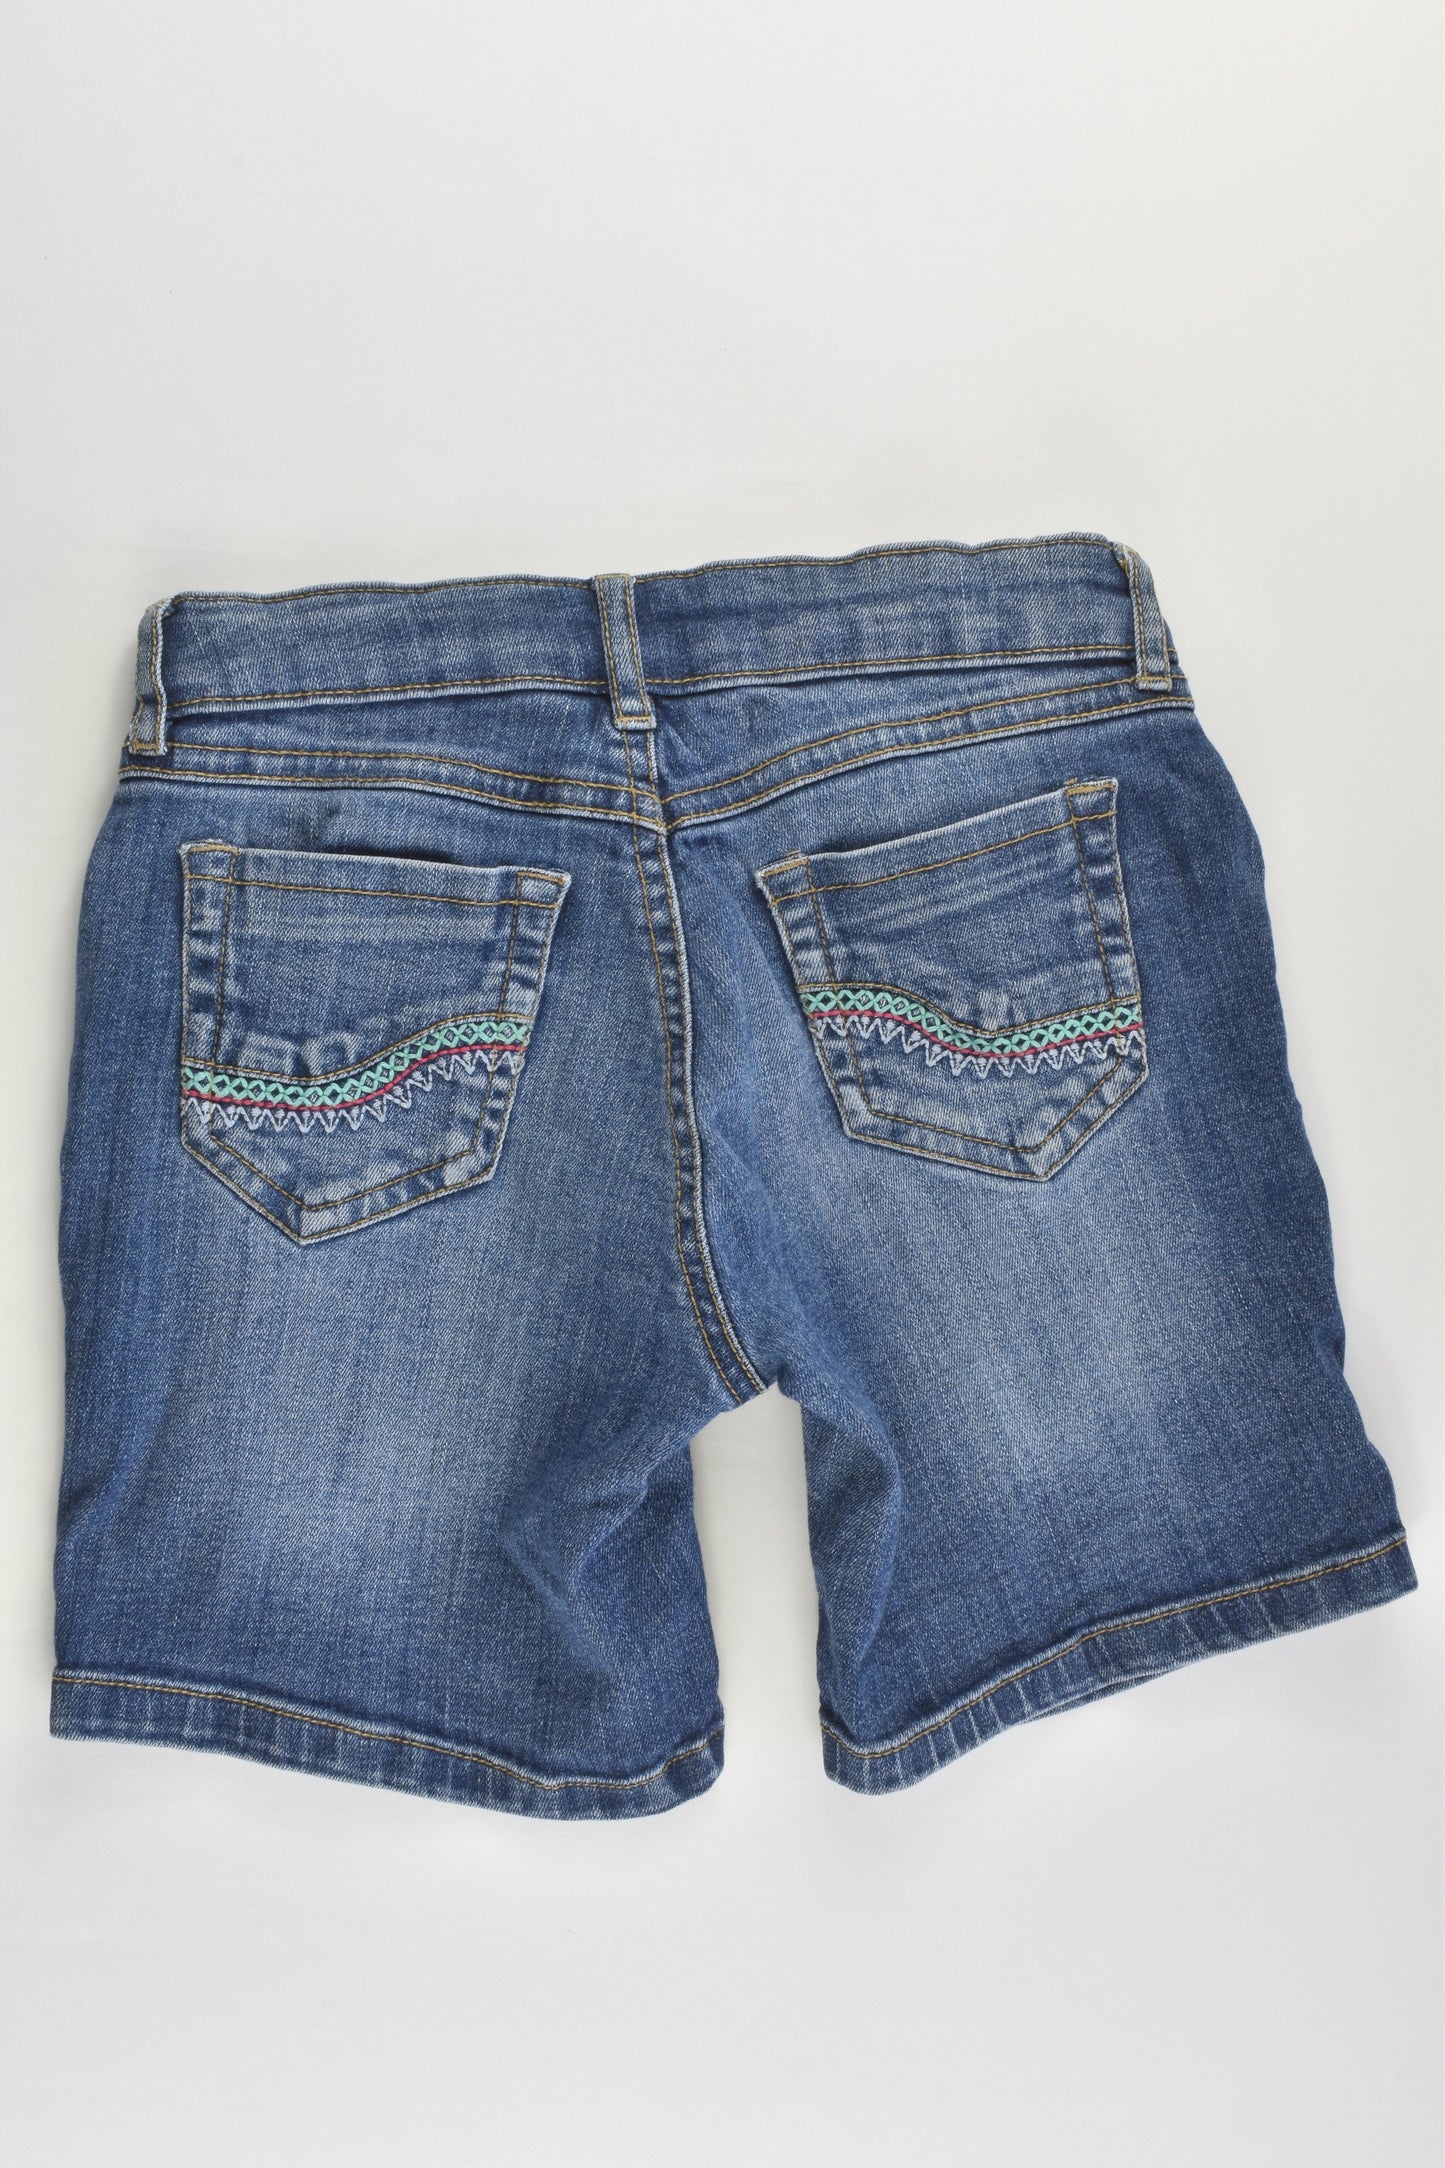 FatFace Size 6-7 Stretchy Denim Shorts with Embroidery